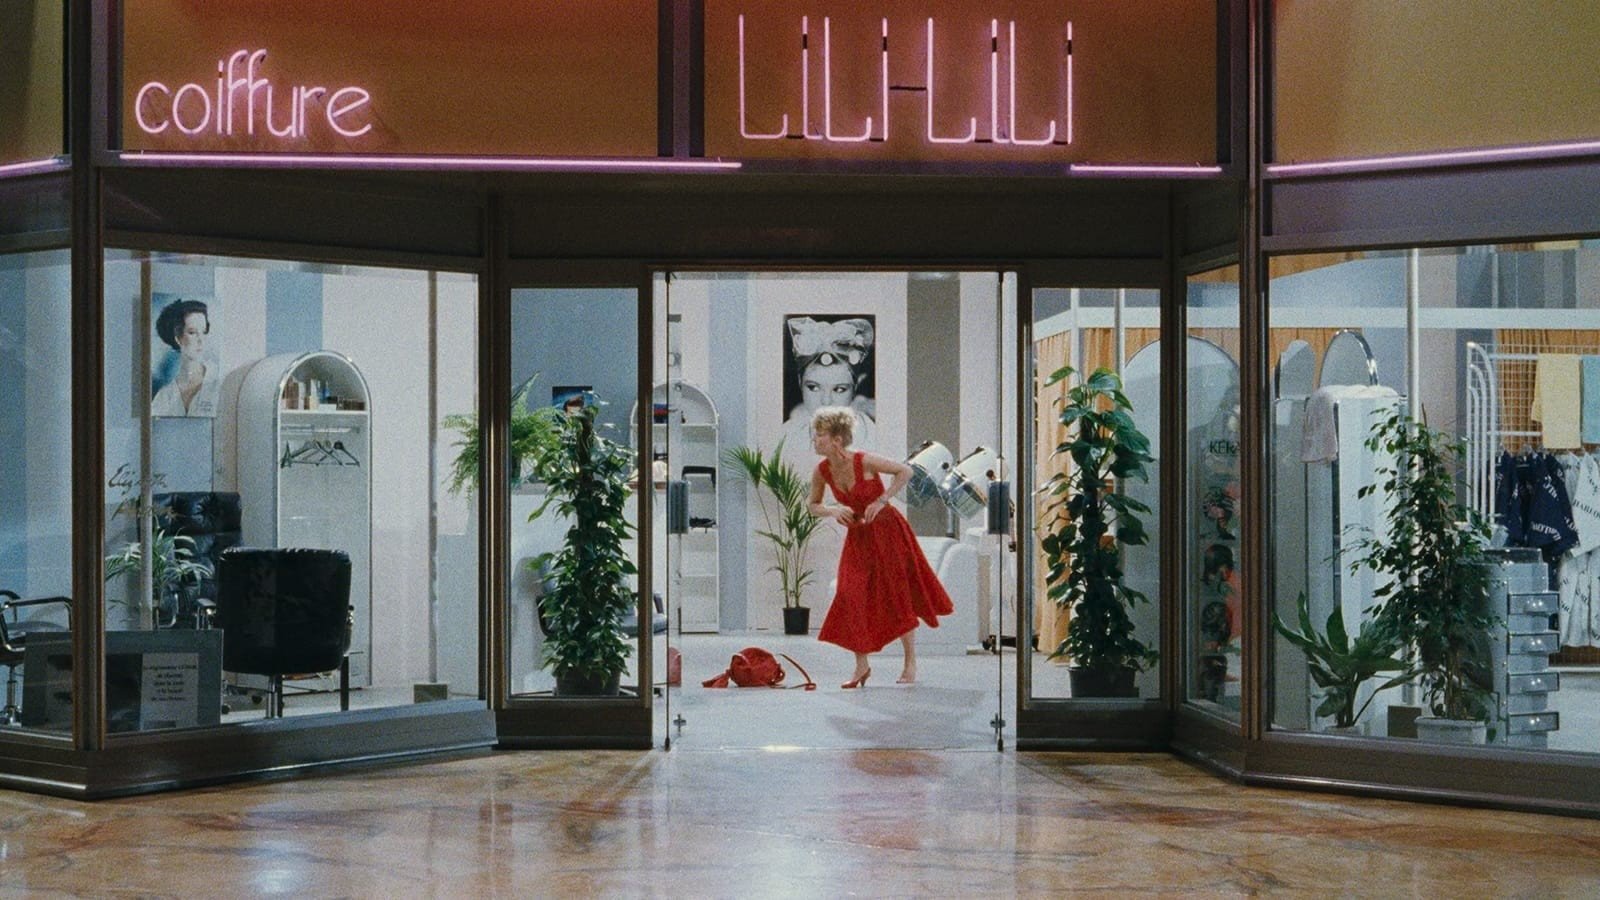 A woman in a red dress and heels stands framed by a hair salon's doorway in an indoor shopping mall with the word "coiffure" in neon above the door to the left